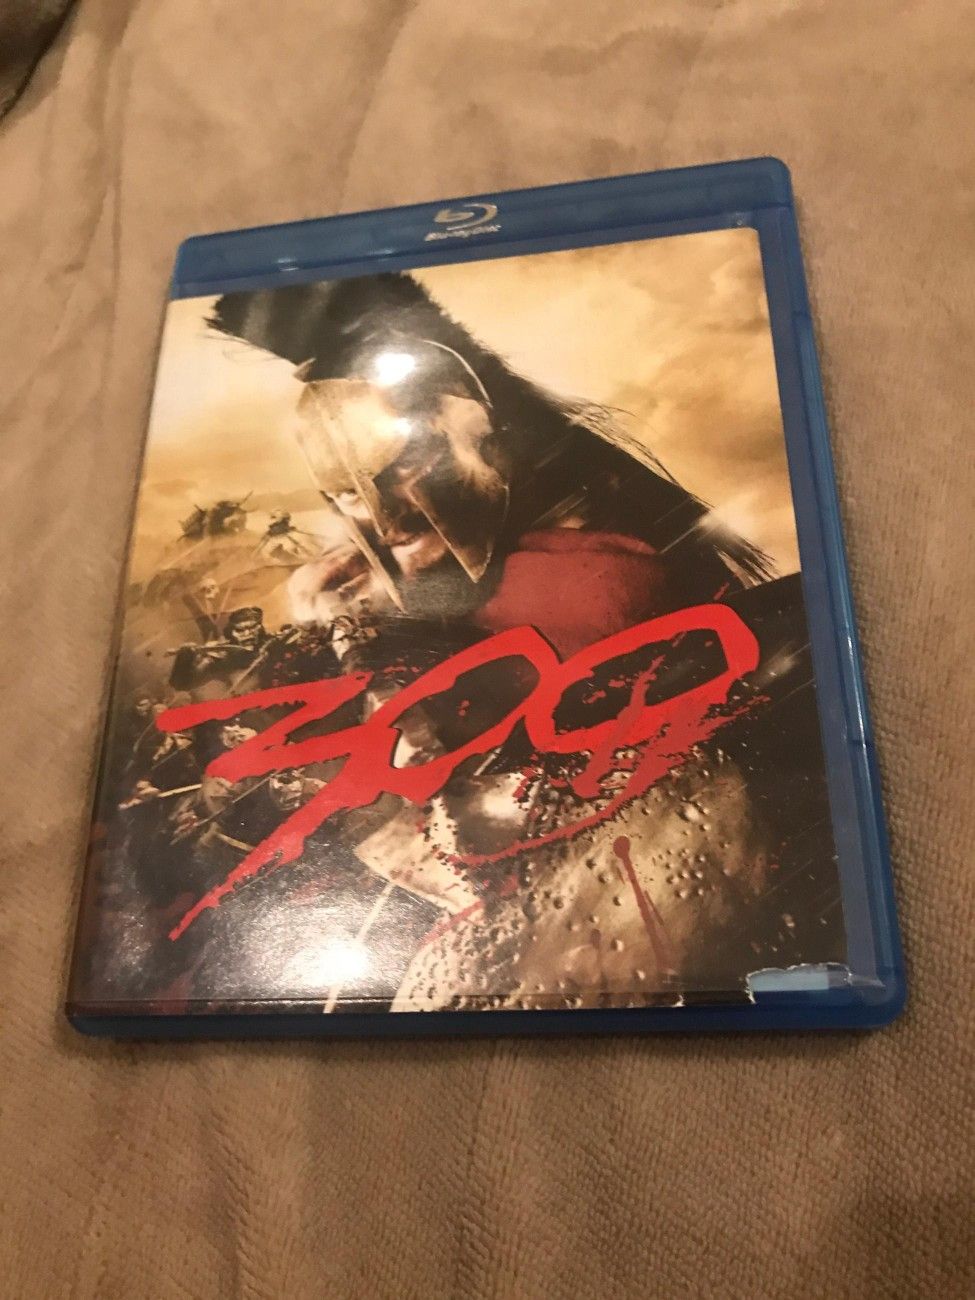 "300" blu Ray movie, tested and works perfectly, excellent condition Just $4 plus $3 to ship or Pickup Acton ma